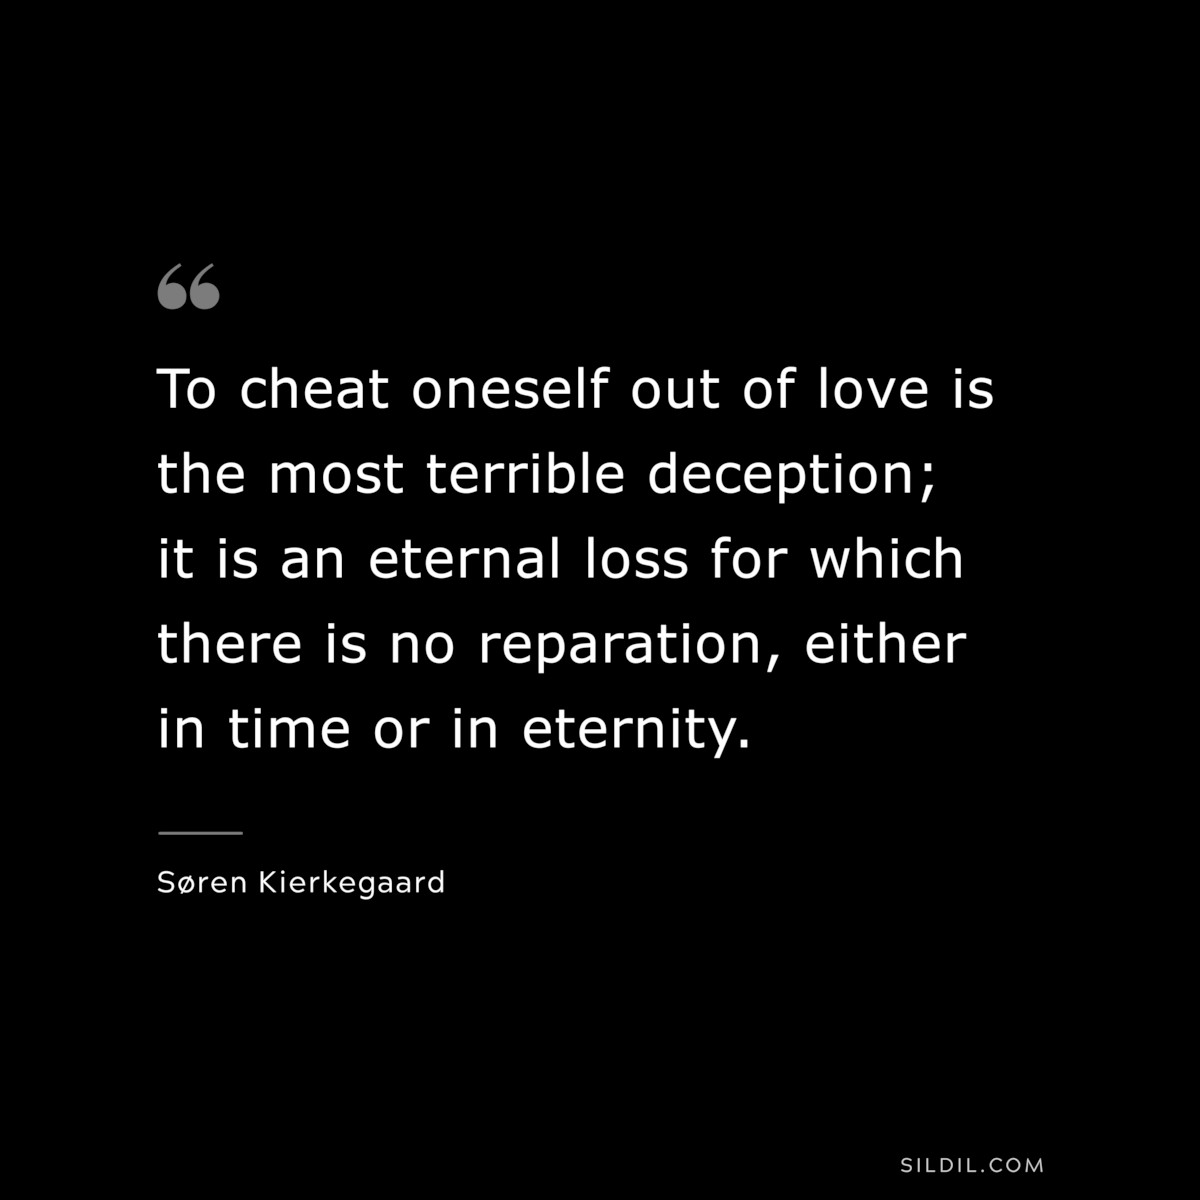 To cheat oneself out of love is the most terrible deception; it is an eternal loss for which there is no reparation, either in time or in eternity. ― Søren Kierkegaard